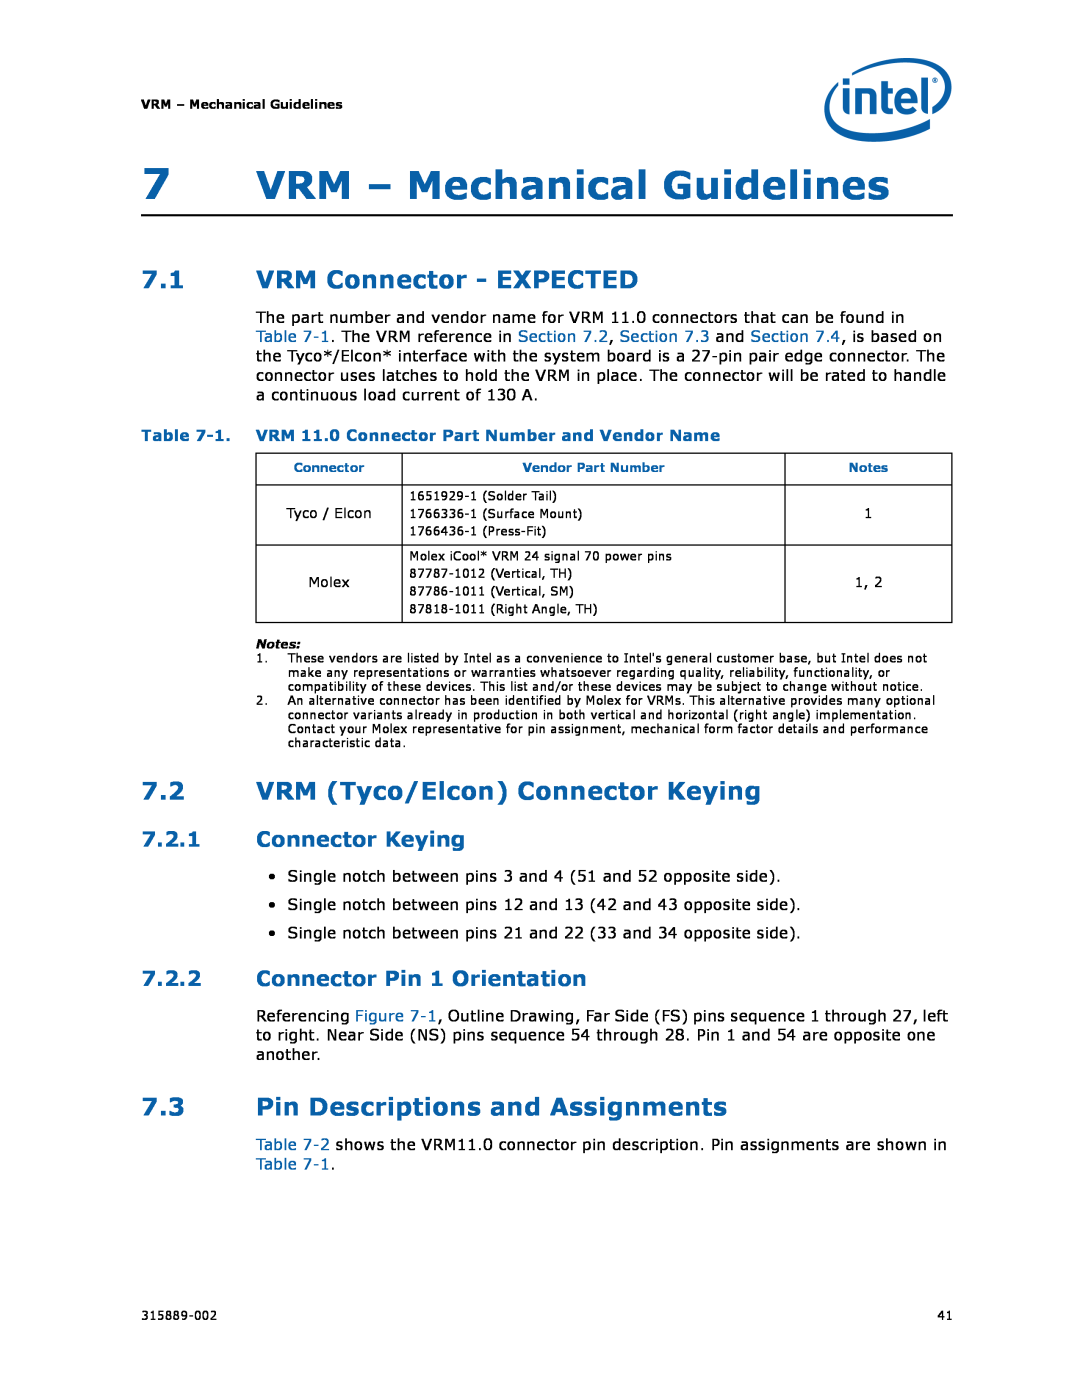 Intel 315889-002 manual 7VRM - Mechanical Guidelines, 7.1VRM Connector - EXPECTED, 7.2VRM Tyco/Elcon Connector Keying 